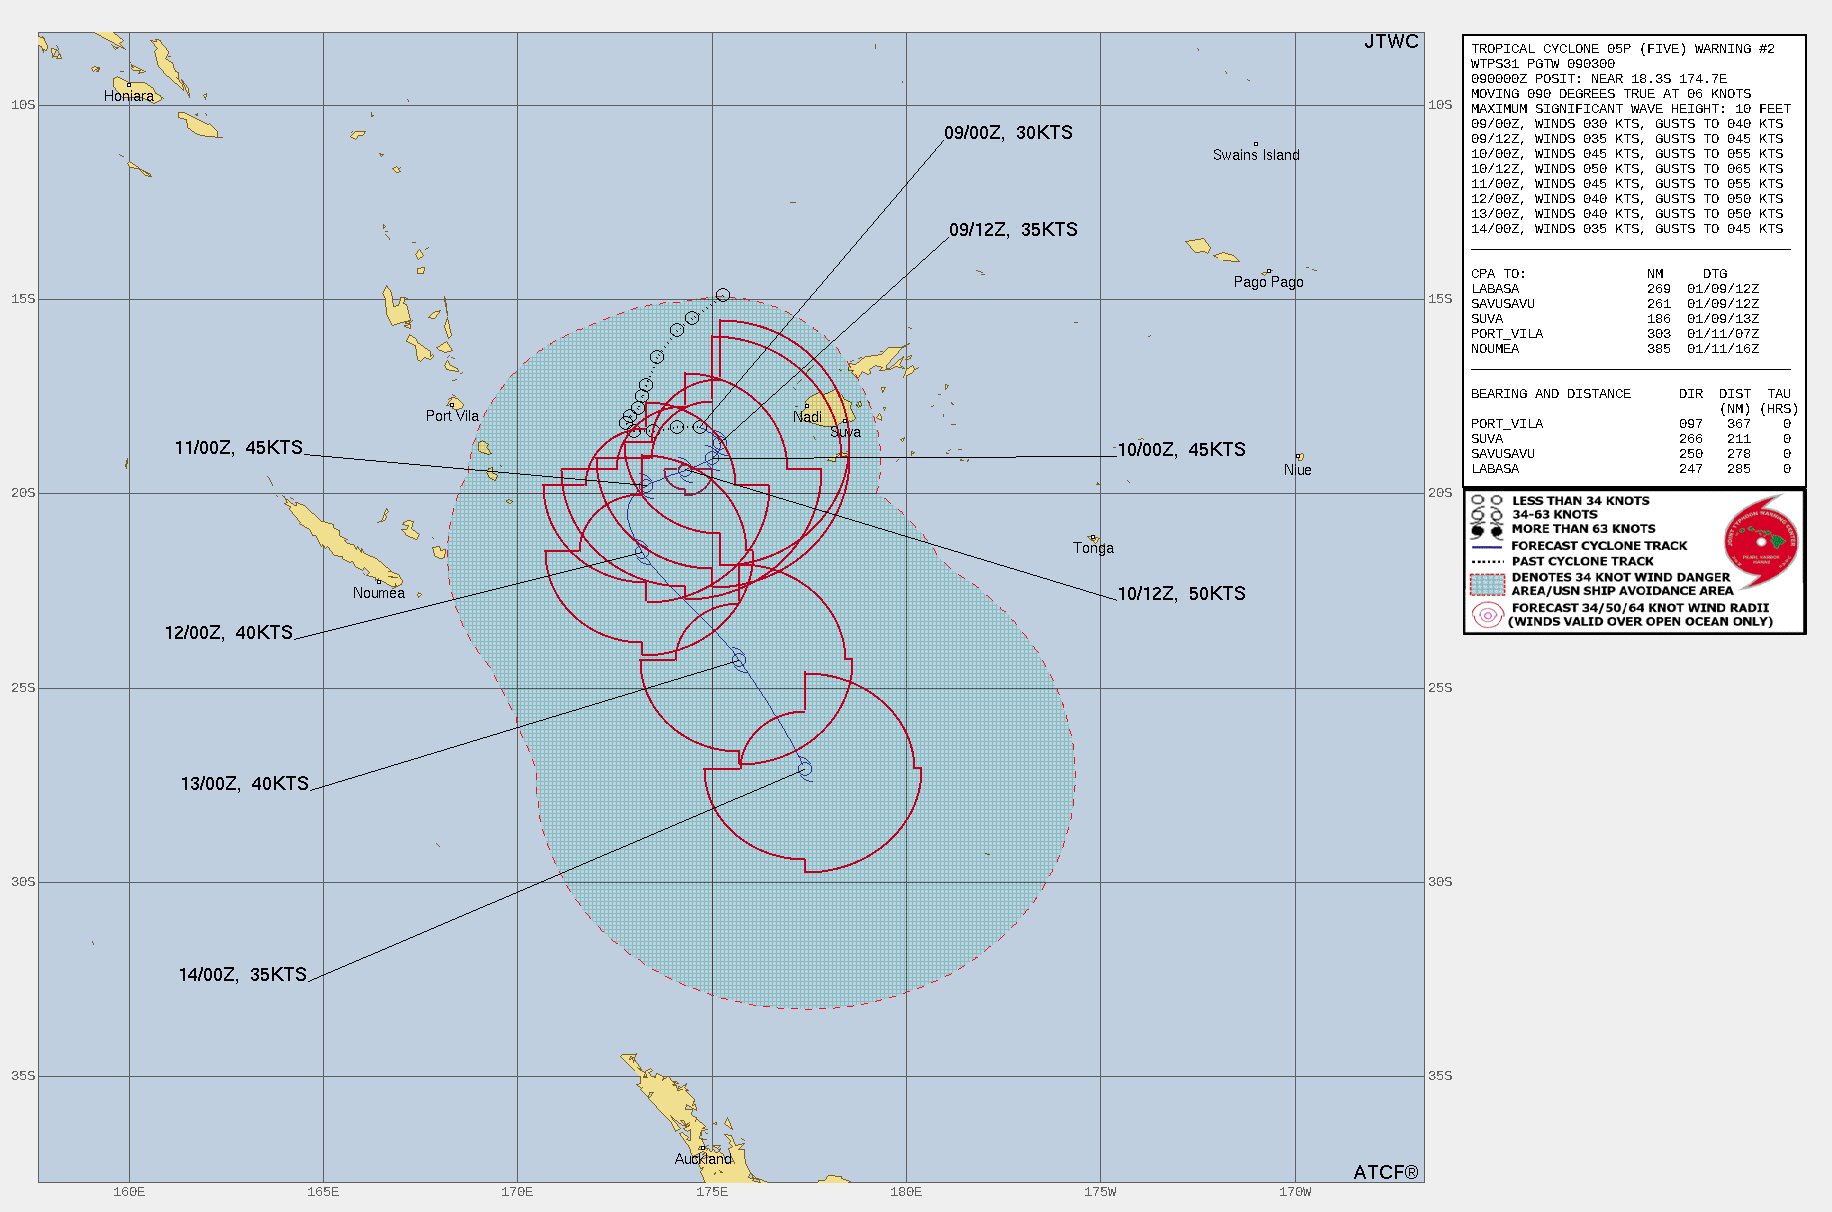 FORECAST REASONING.  SIGNIFICANT FORECAST CHANGES: THERE ARE NO SIGNIFICANT CHANGES TO THE FORECAST FROM THE PREVIOUS WARNING.  FORECAST DISCUSSION: TC 05P IS FORECAST TO TRACK SLOWLY  SOUTHEASTWARD THROUGH 12H WITHIN THE COMPETING STEERING PATTERN  BETWEEN THE NEAR EQUATORIAL RIDGE (NER) AND THE SUBTROPICAL RIDGE (STR). AFTER 12H, THE STR SHOULD BUILD TO THE  SOUTH AND BECOME THE DOMINANT STEERING INFLUENCE THROUGH 60H WITH  A GENERALLY WESTWARD TO WEST-SOUTHWESTWARD TRACK. AFTER 60H, AN  APPROACHING MAJOR SHORTWAVE TROUGH IS EXPECTED TO WEAKEN THE STR,  WHICH WILL LEAD TO A FASTER SOUTHEASTWARD TRACK TOWARD THE BREAK IN  THE STR ALONG THE WESTERN AND SOUTHWESTERN PERIPHERY OF THE WEAK  STEERING RIDGE POSITIONED TO THE EAST. THE SYSTEM IS EXPECTED TO  REMAIN WITHIN A COMPLEX UPPER-LEVEL ENVIRONMENT UNDER A BROAD UPPER- LEVEL TROUGH, HOWEVER, SLIGHT INTENSIFICATION IS ANTICIPATED DUE TO  ROBUST POLEWARD OUTFLOW WITH A PEAK INTENSITY OF 50 KNOTS EXPECTED  AT 36H. AFTER 36H, TC 05P WILL GRADUALLY WEAKEN AS IT BECOMES  FURTHER EMBEDDED WITHIN THE UPPER-LEVEL TROUGH. AFTER 96H, TC 05P  IS FORECASTED TO GRADUALLY TRANSITION INTO A SUBTROPICAL CYCLONE.